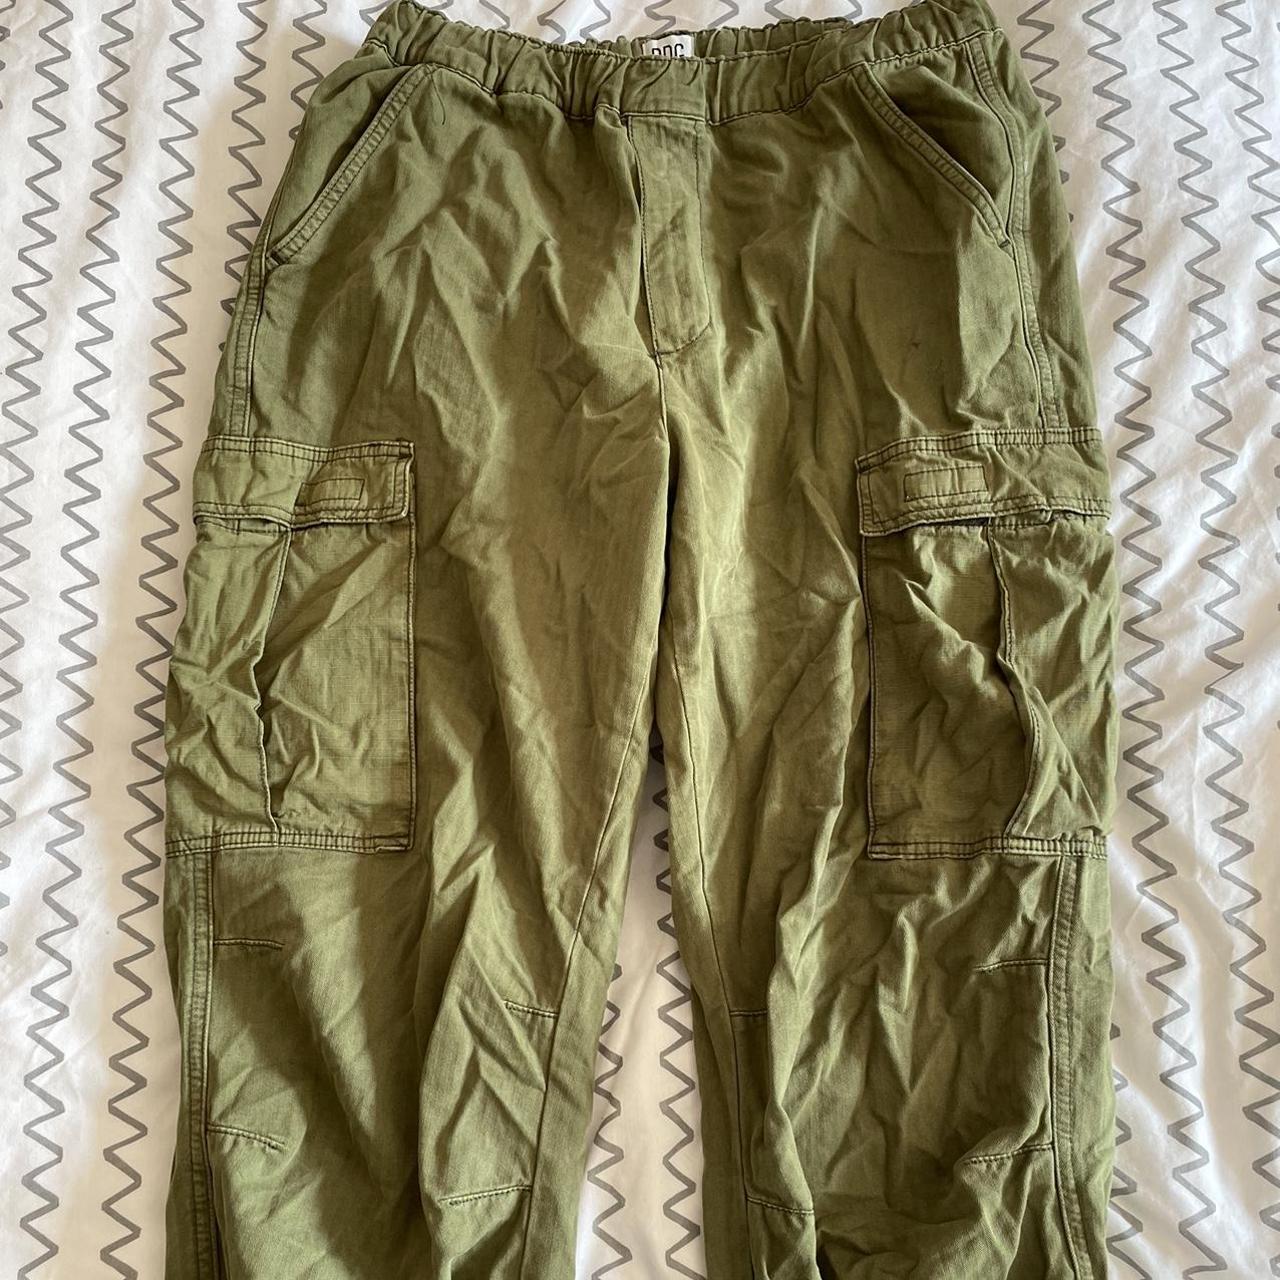 BDG URBAN OUTFITTERS CARGOS ADJUSTABLE ANKLES SIZE... - Depop